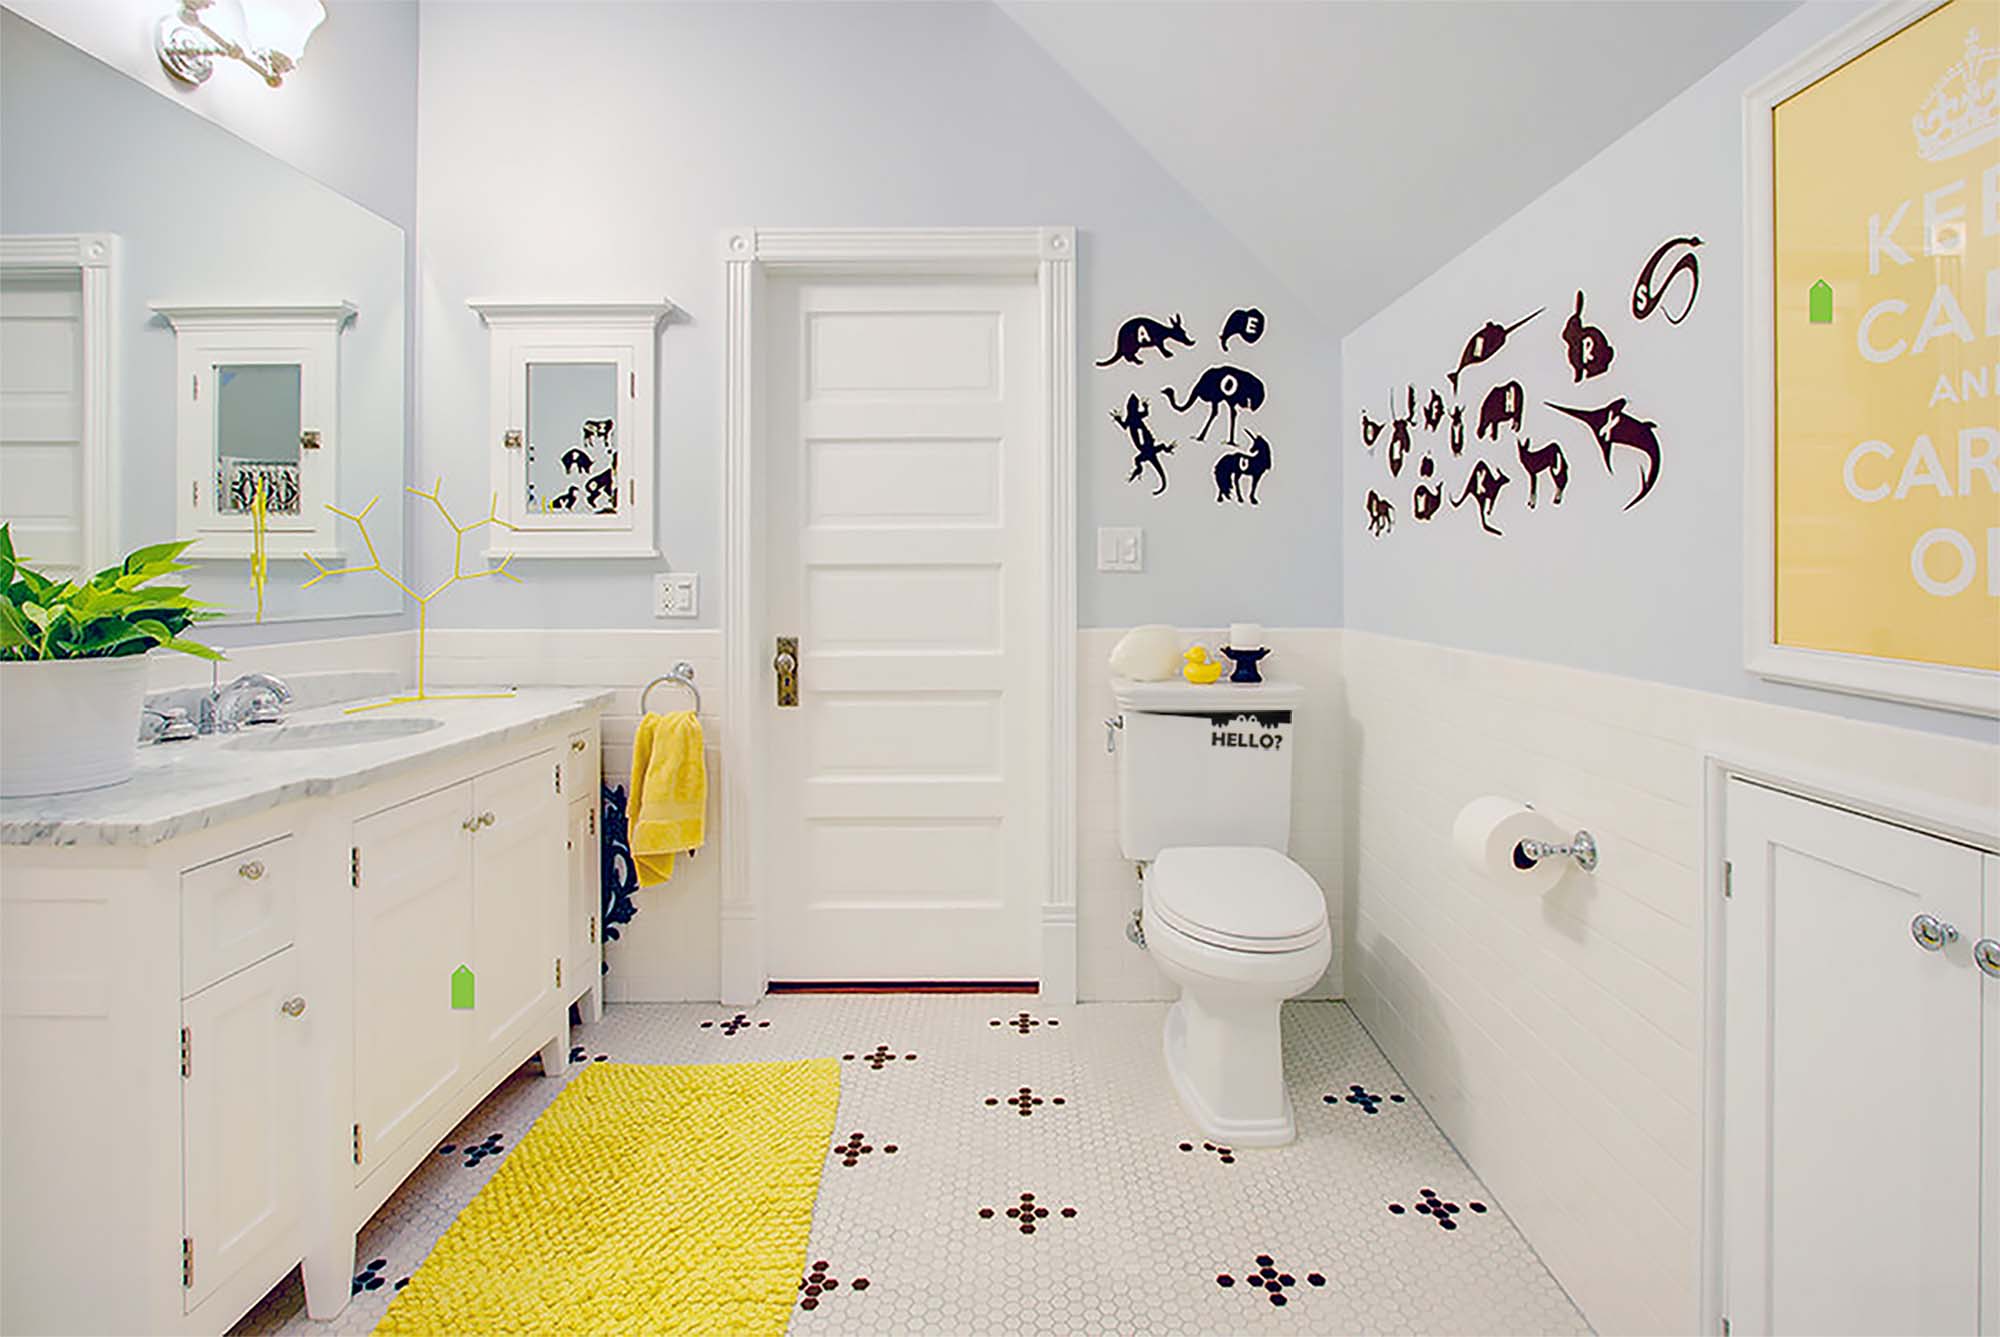 35+ Ways To Transform Your Boring Restroom Into A Humorous Aesthetic Space